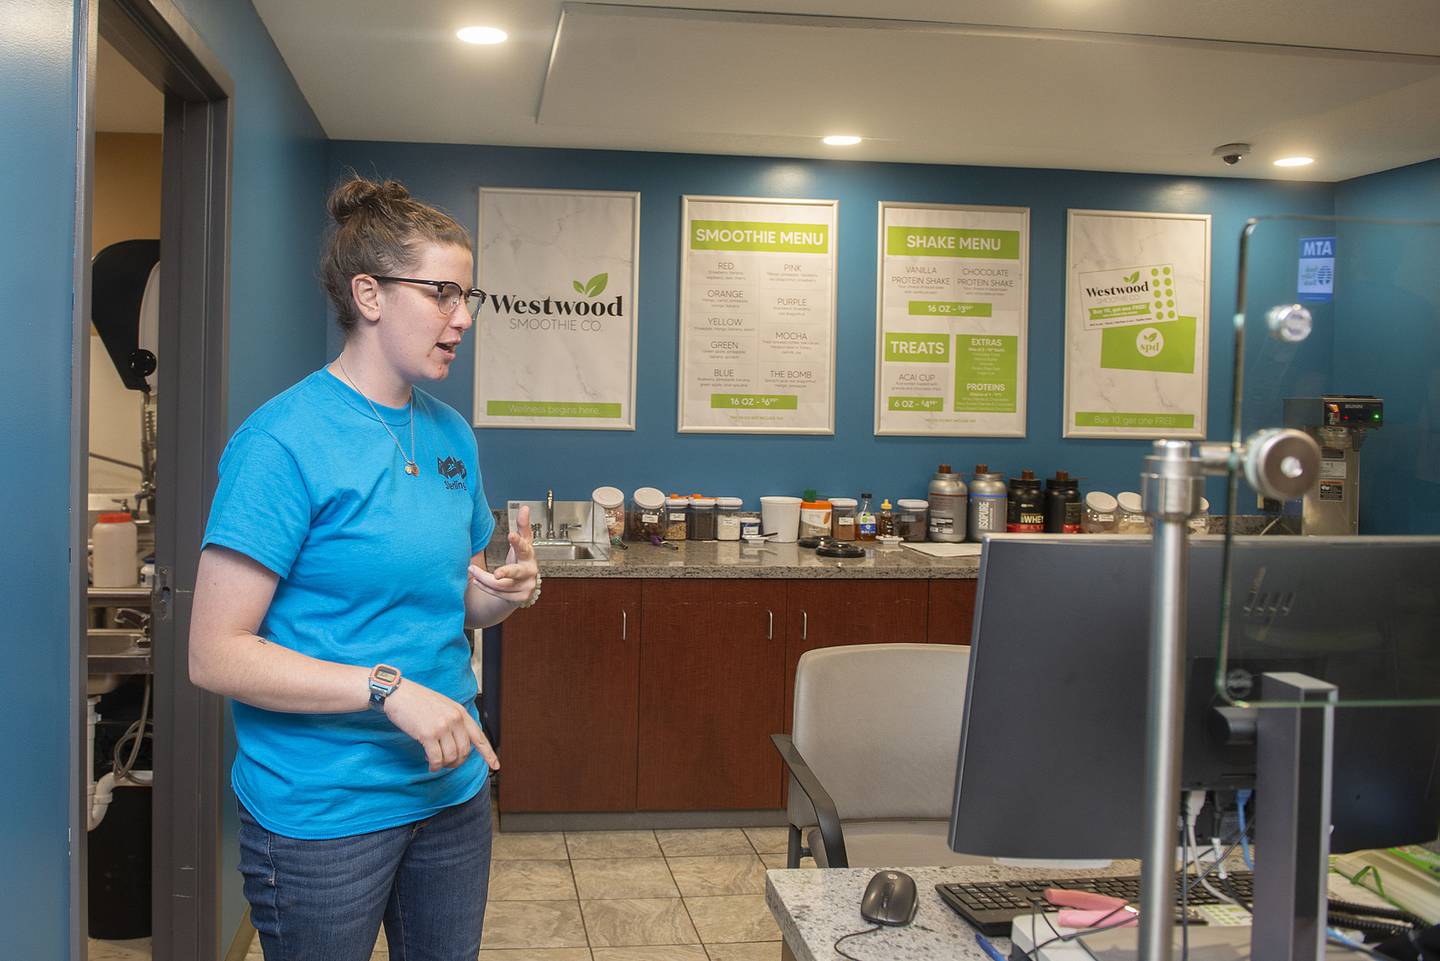 Melissa Hurley talks about the smoothie and shake options Westwood has to offer.